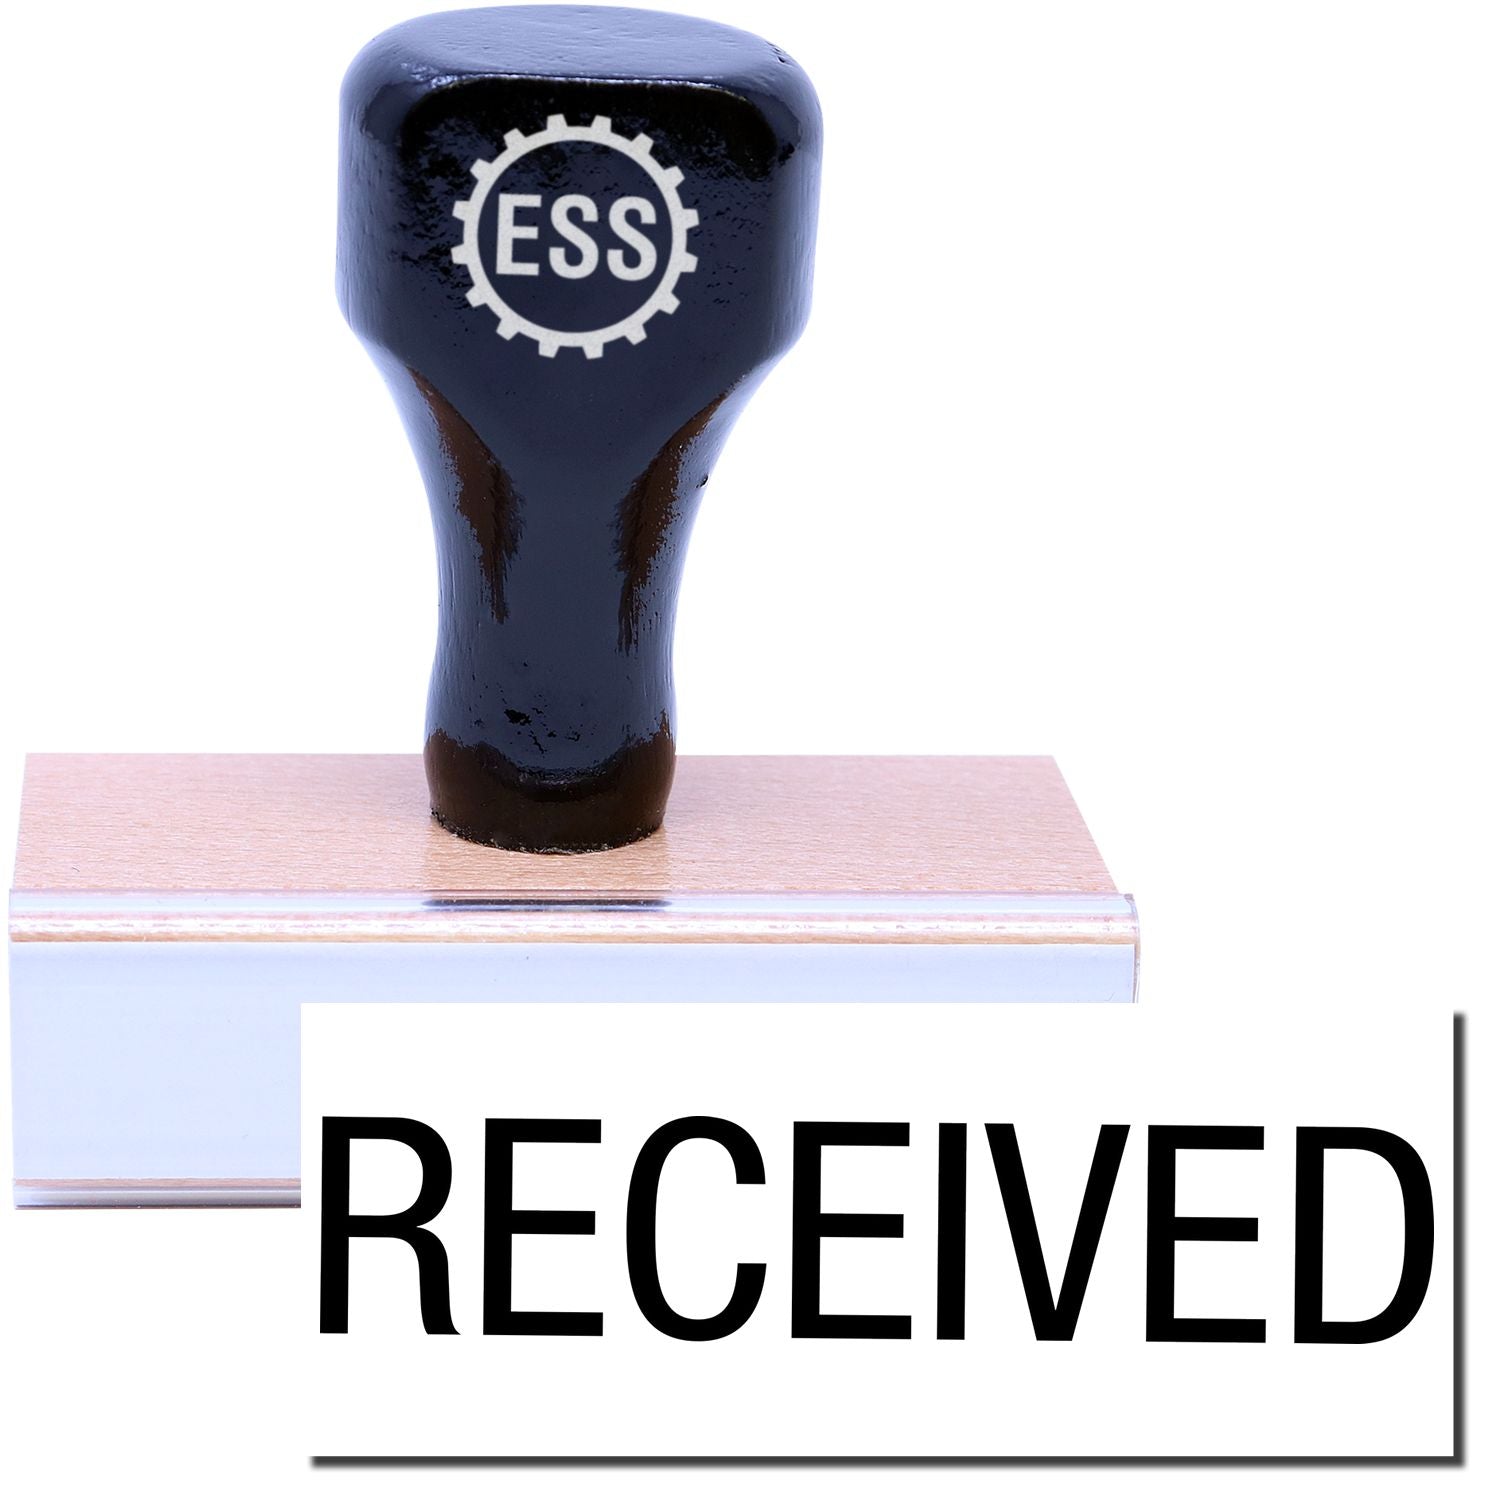 A stock office rubber stamp with a stamped image showing how the text "RECEIVED" in a large font is displayed after stamping.